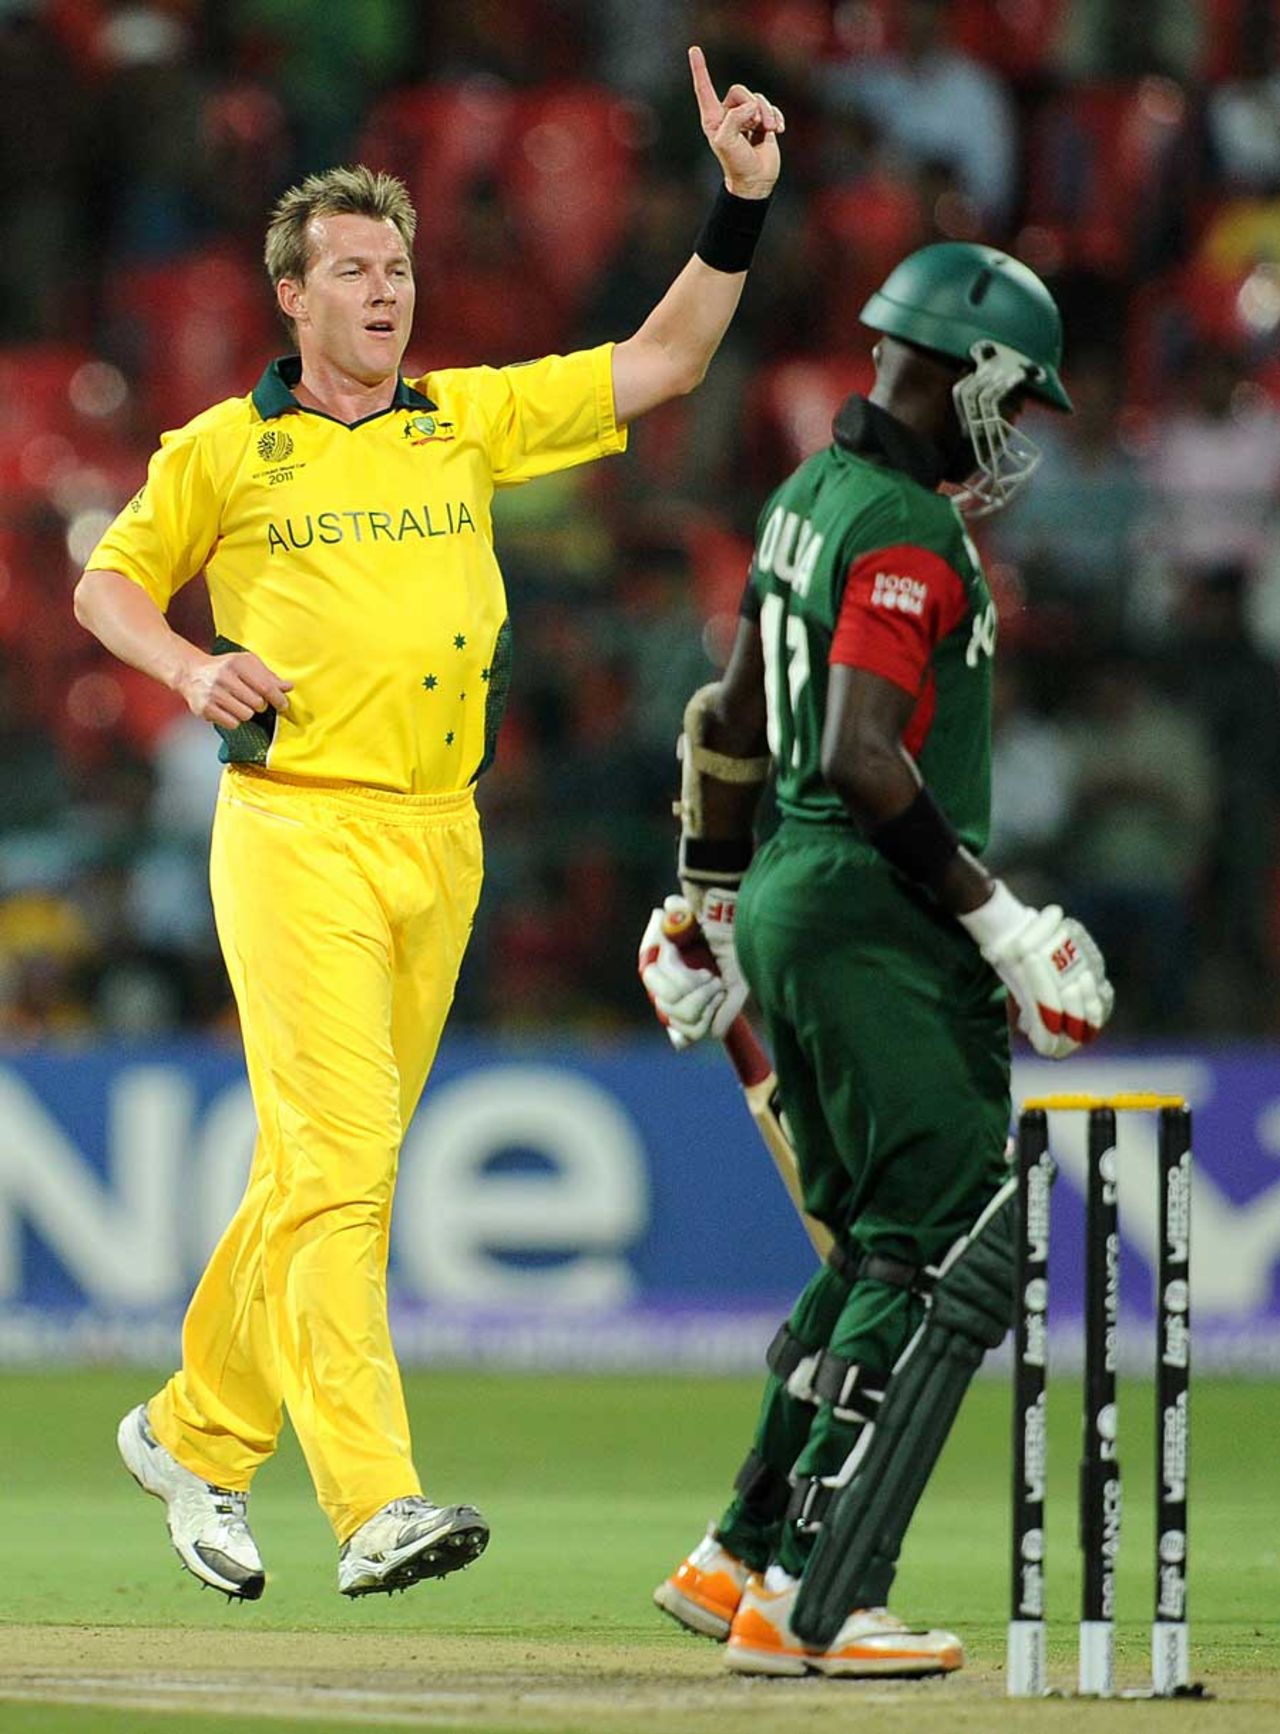 Brett Lee quickly removed Maurice Ouma, Australia v Kenya, World Cup 2011, Group A, Bangalore, March 13, 2011